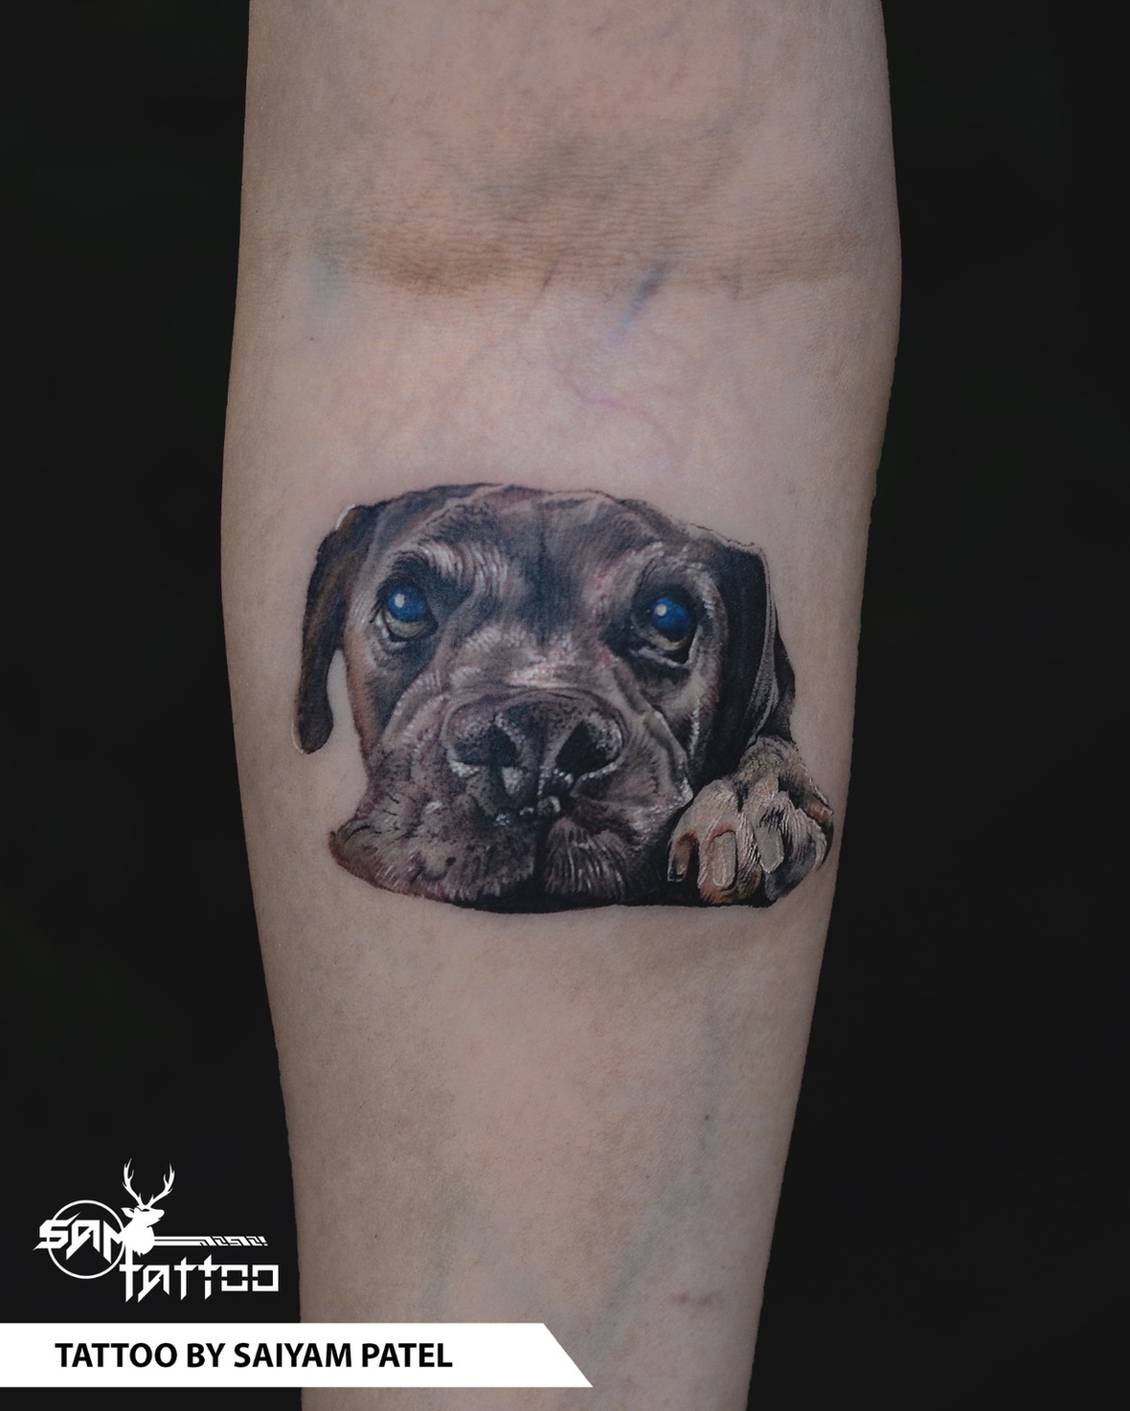 The Best Dog Tattoo Designs: Realistic Portraits to Paw Prints